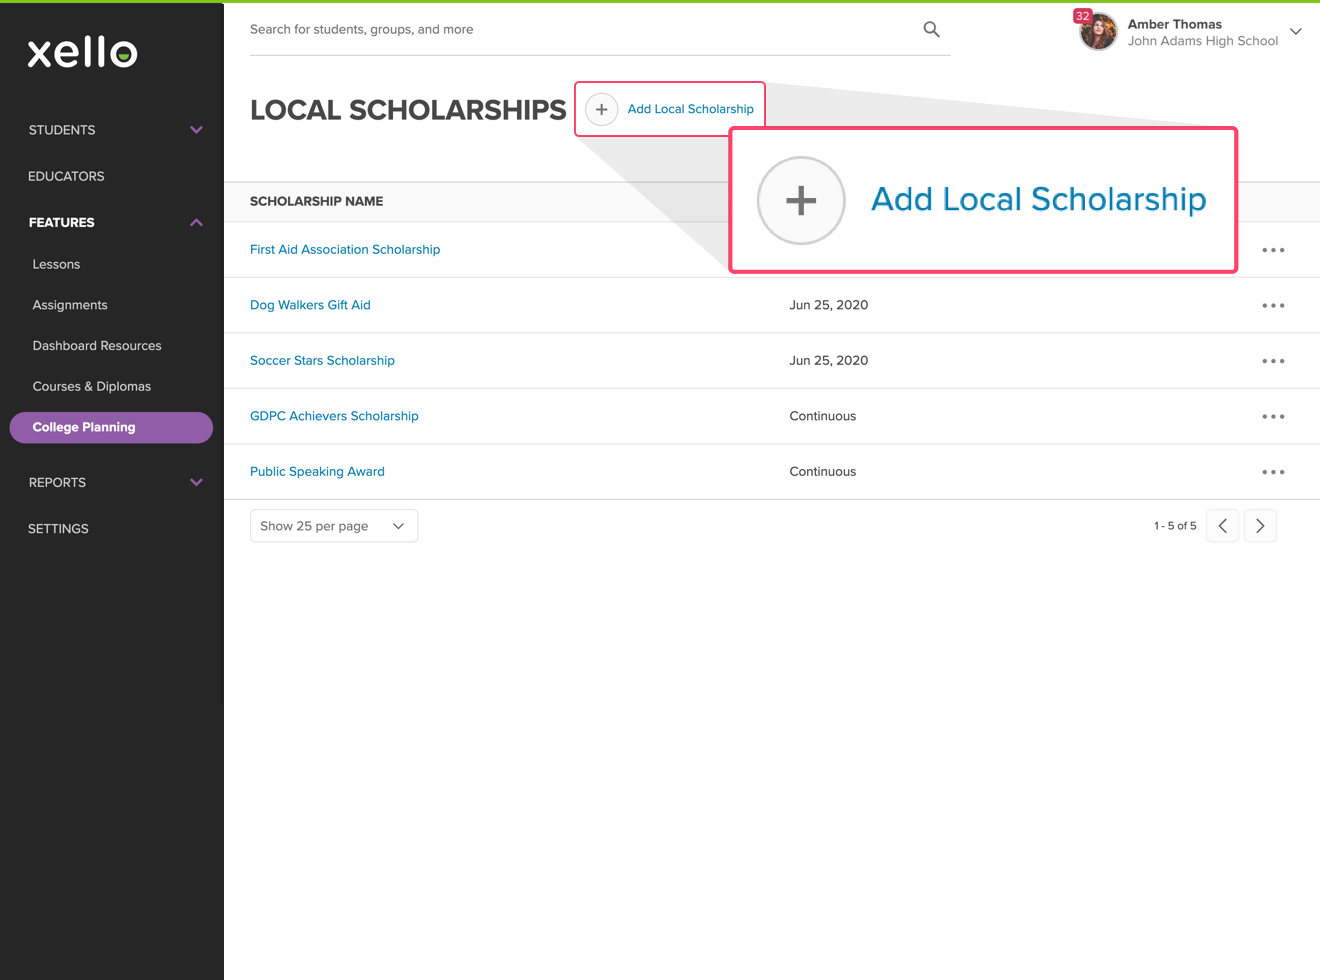 Local-Scholarships-and-link-to-add